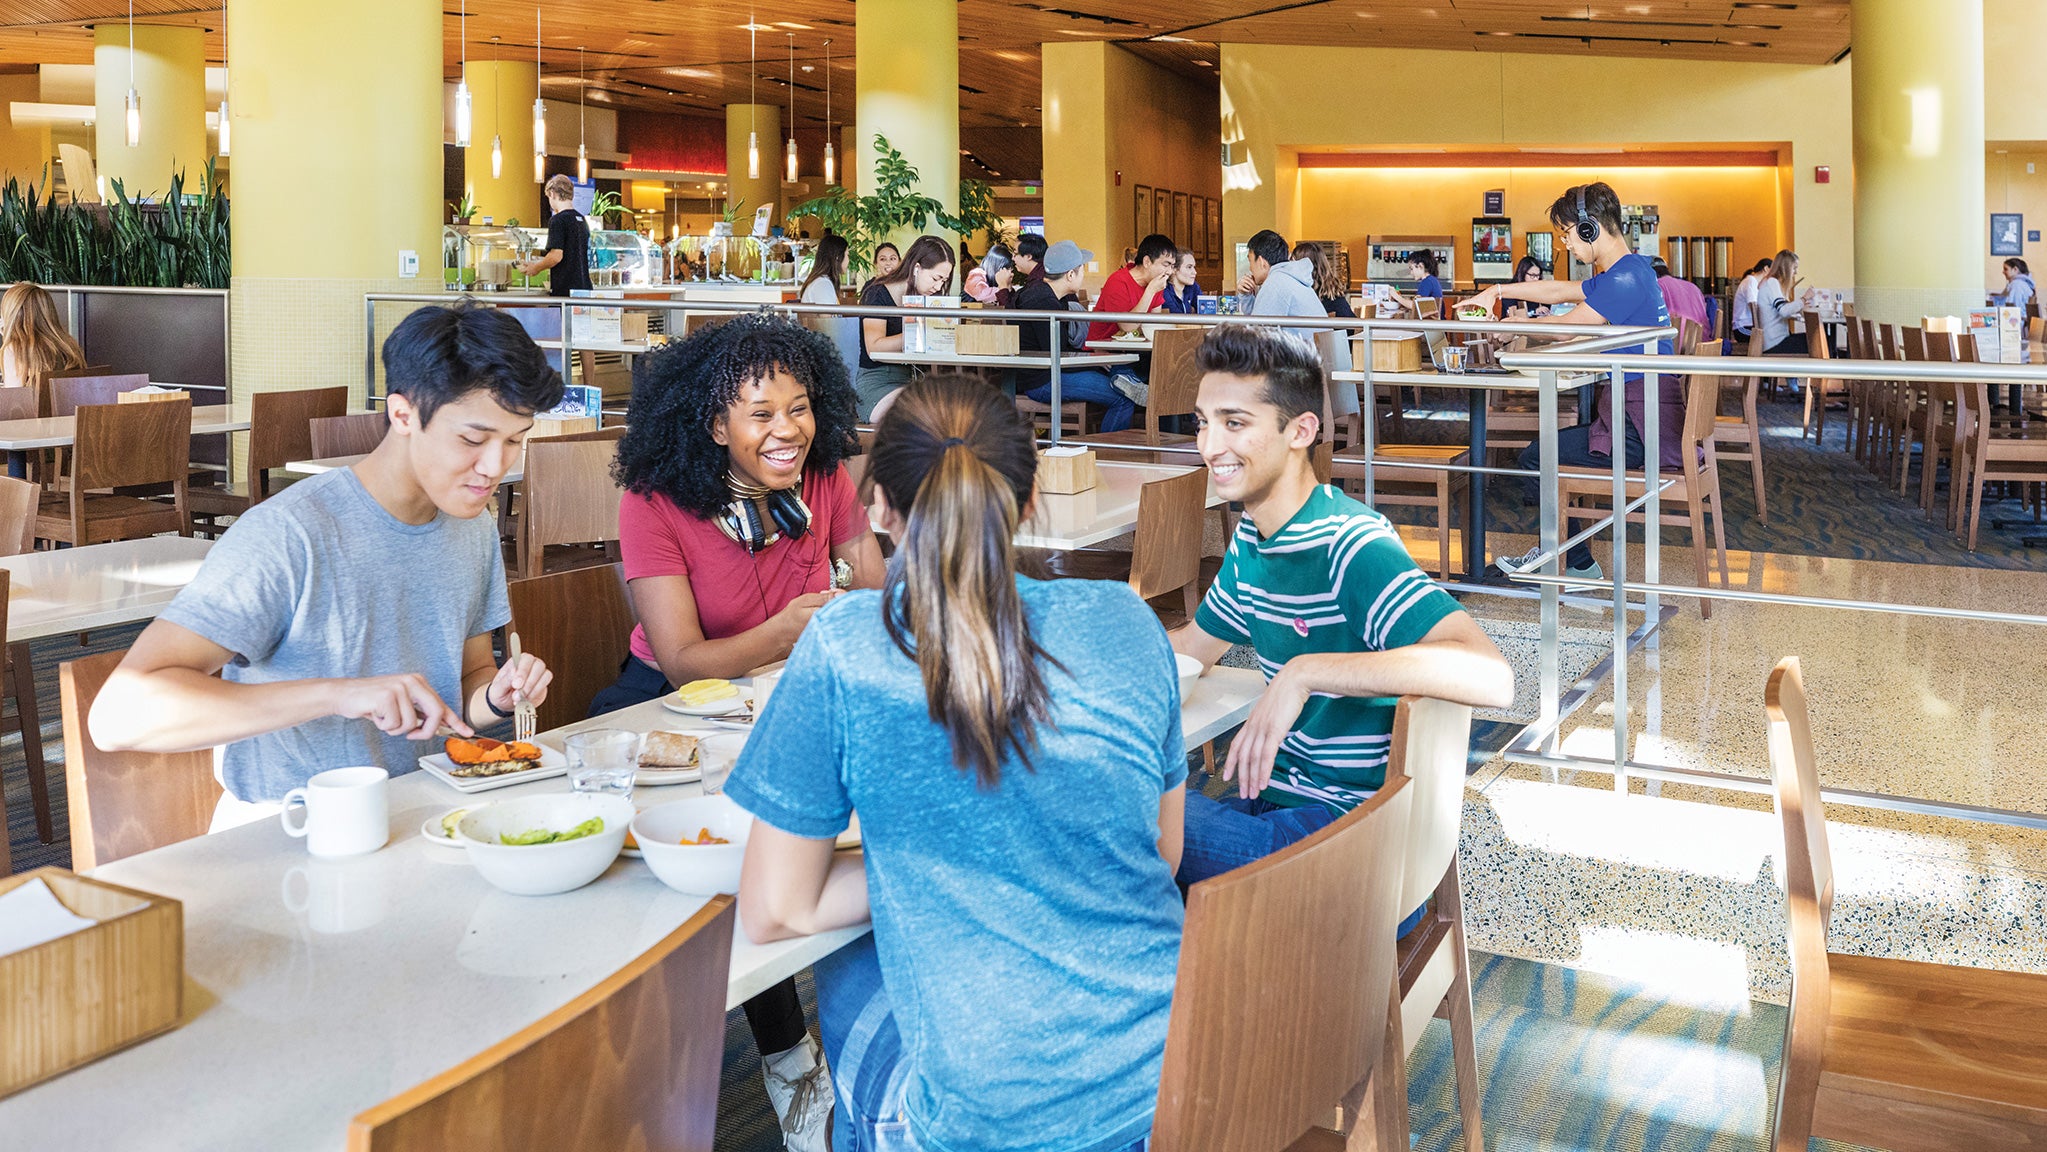 Students enjoy a meal together at Bruin Plate.